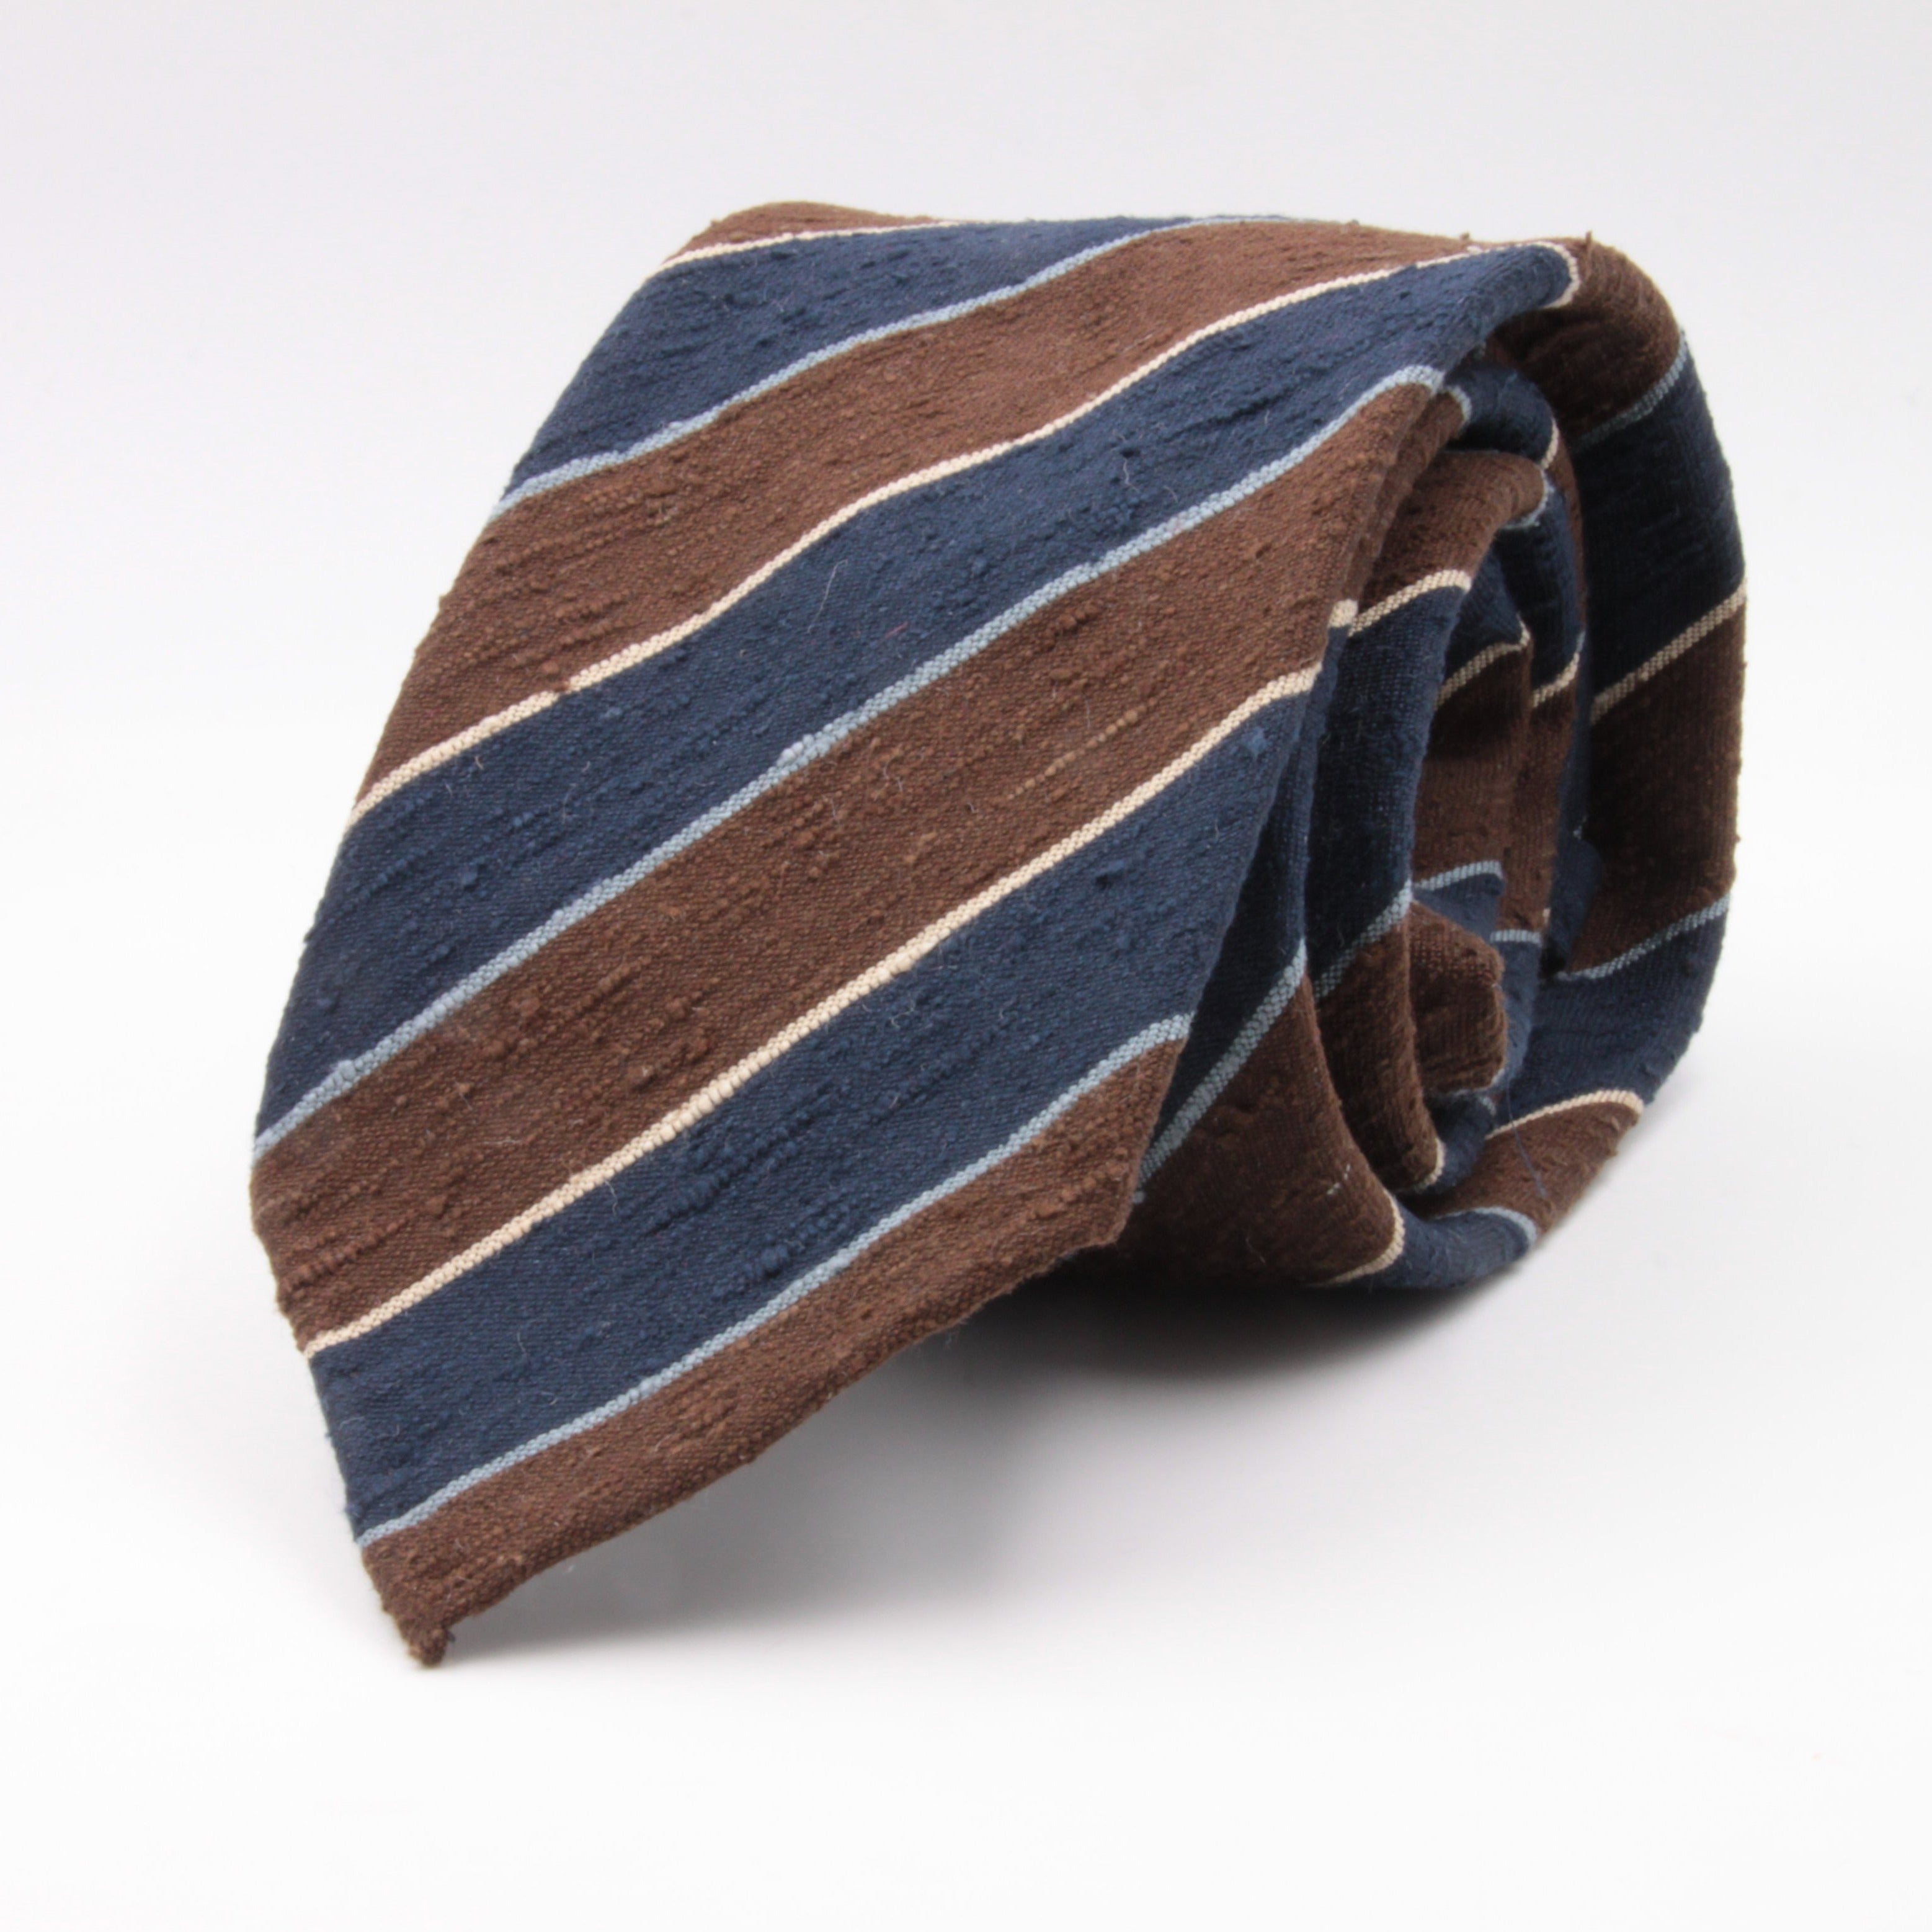 Cruciani & Bella 100% Silk Shantung Unlined Hand rolled blades Blue, Brown, Blue Sky and Yellow stripe tie Handmade in Italy 8 cm x 150 cm